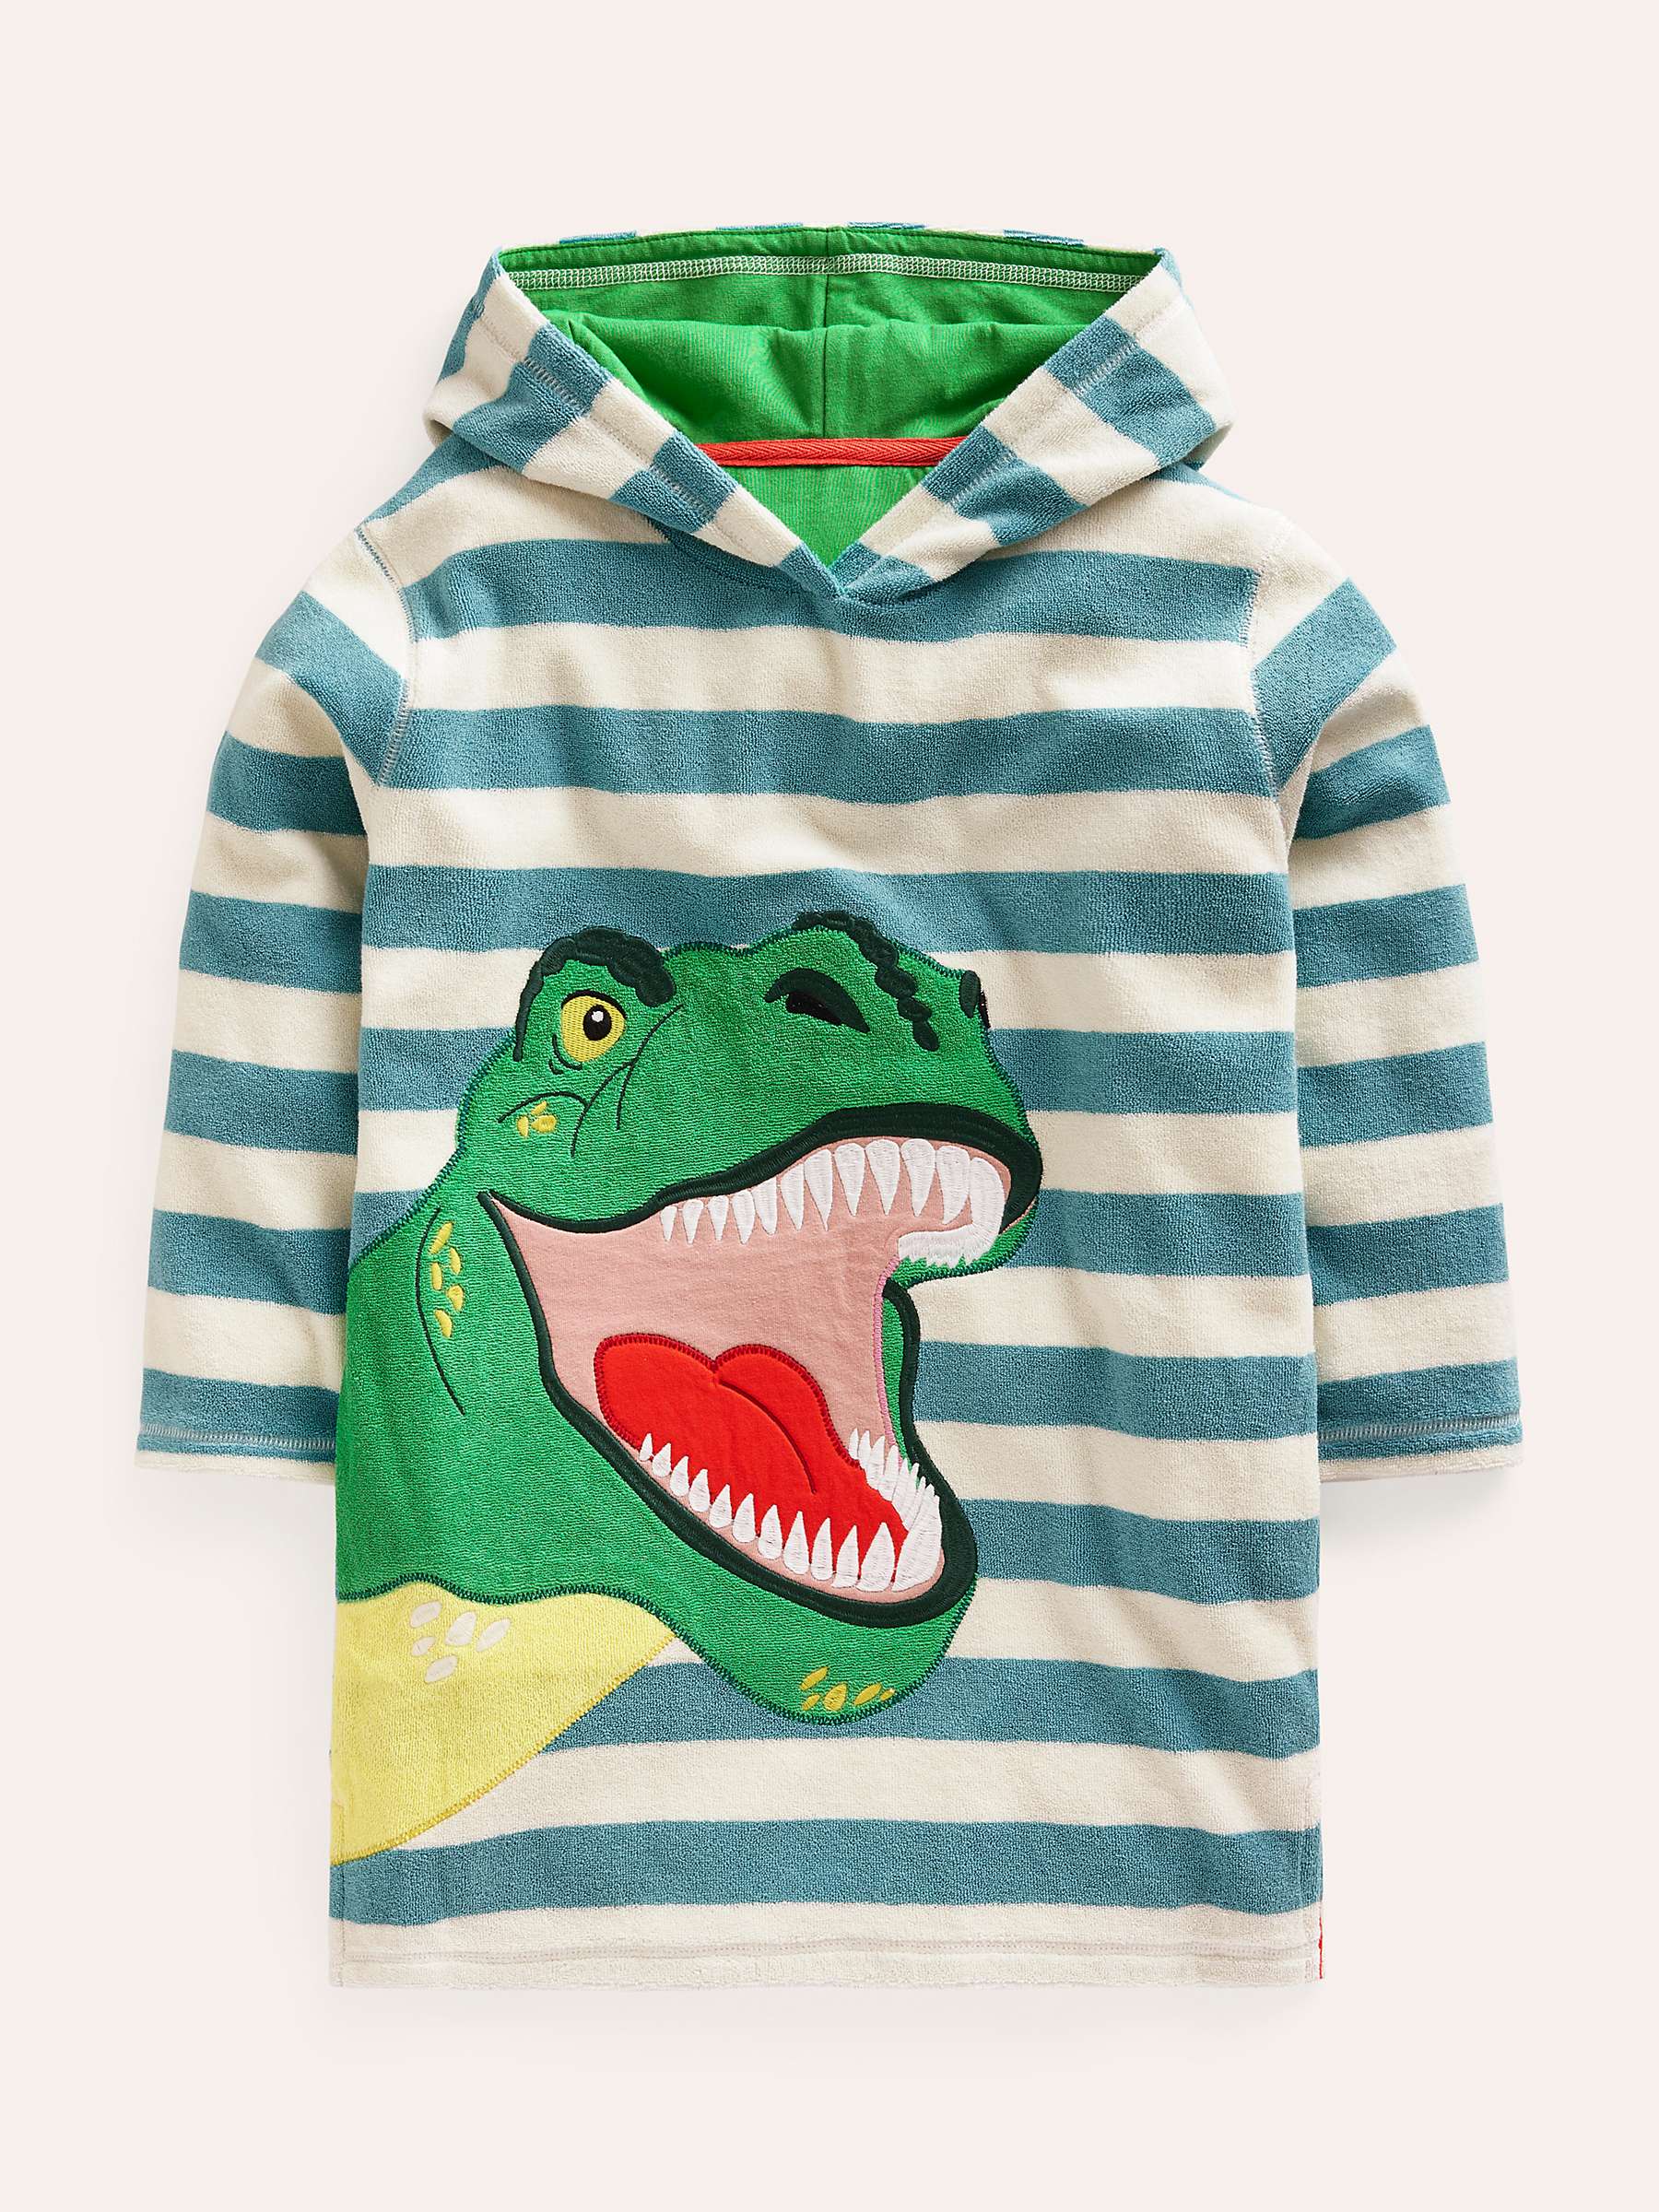 Buy Mini Boden Kids' Dino Applique Towelling Throw-On, Blue/Ivory Stripe Online at johnlewis.com